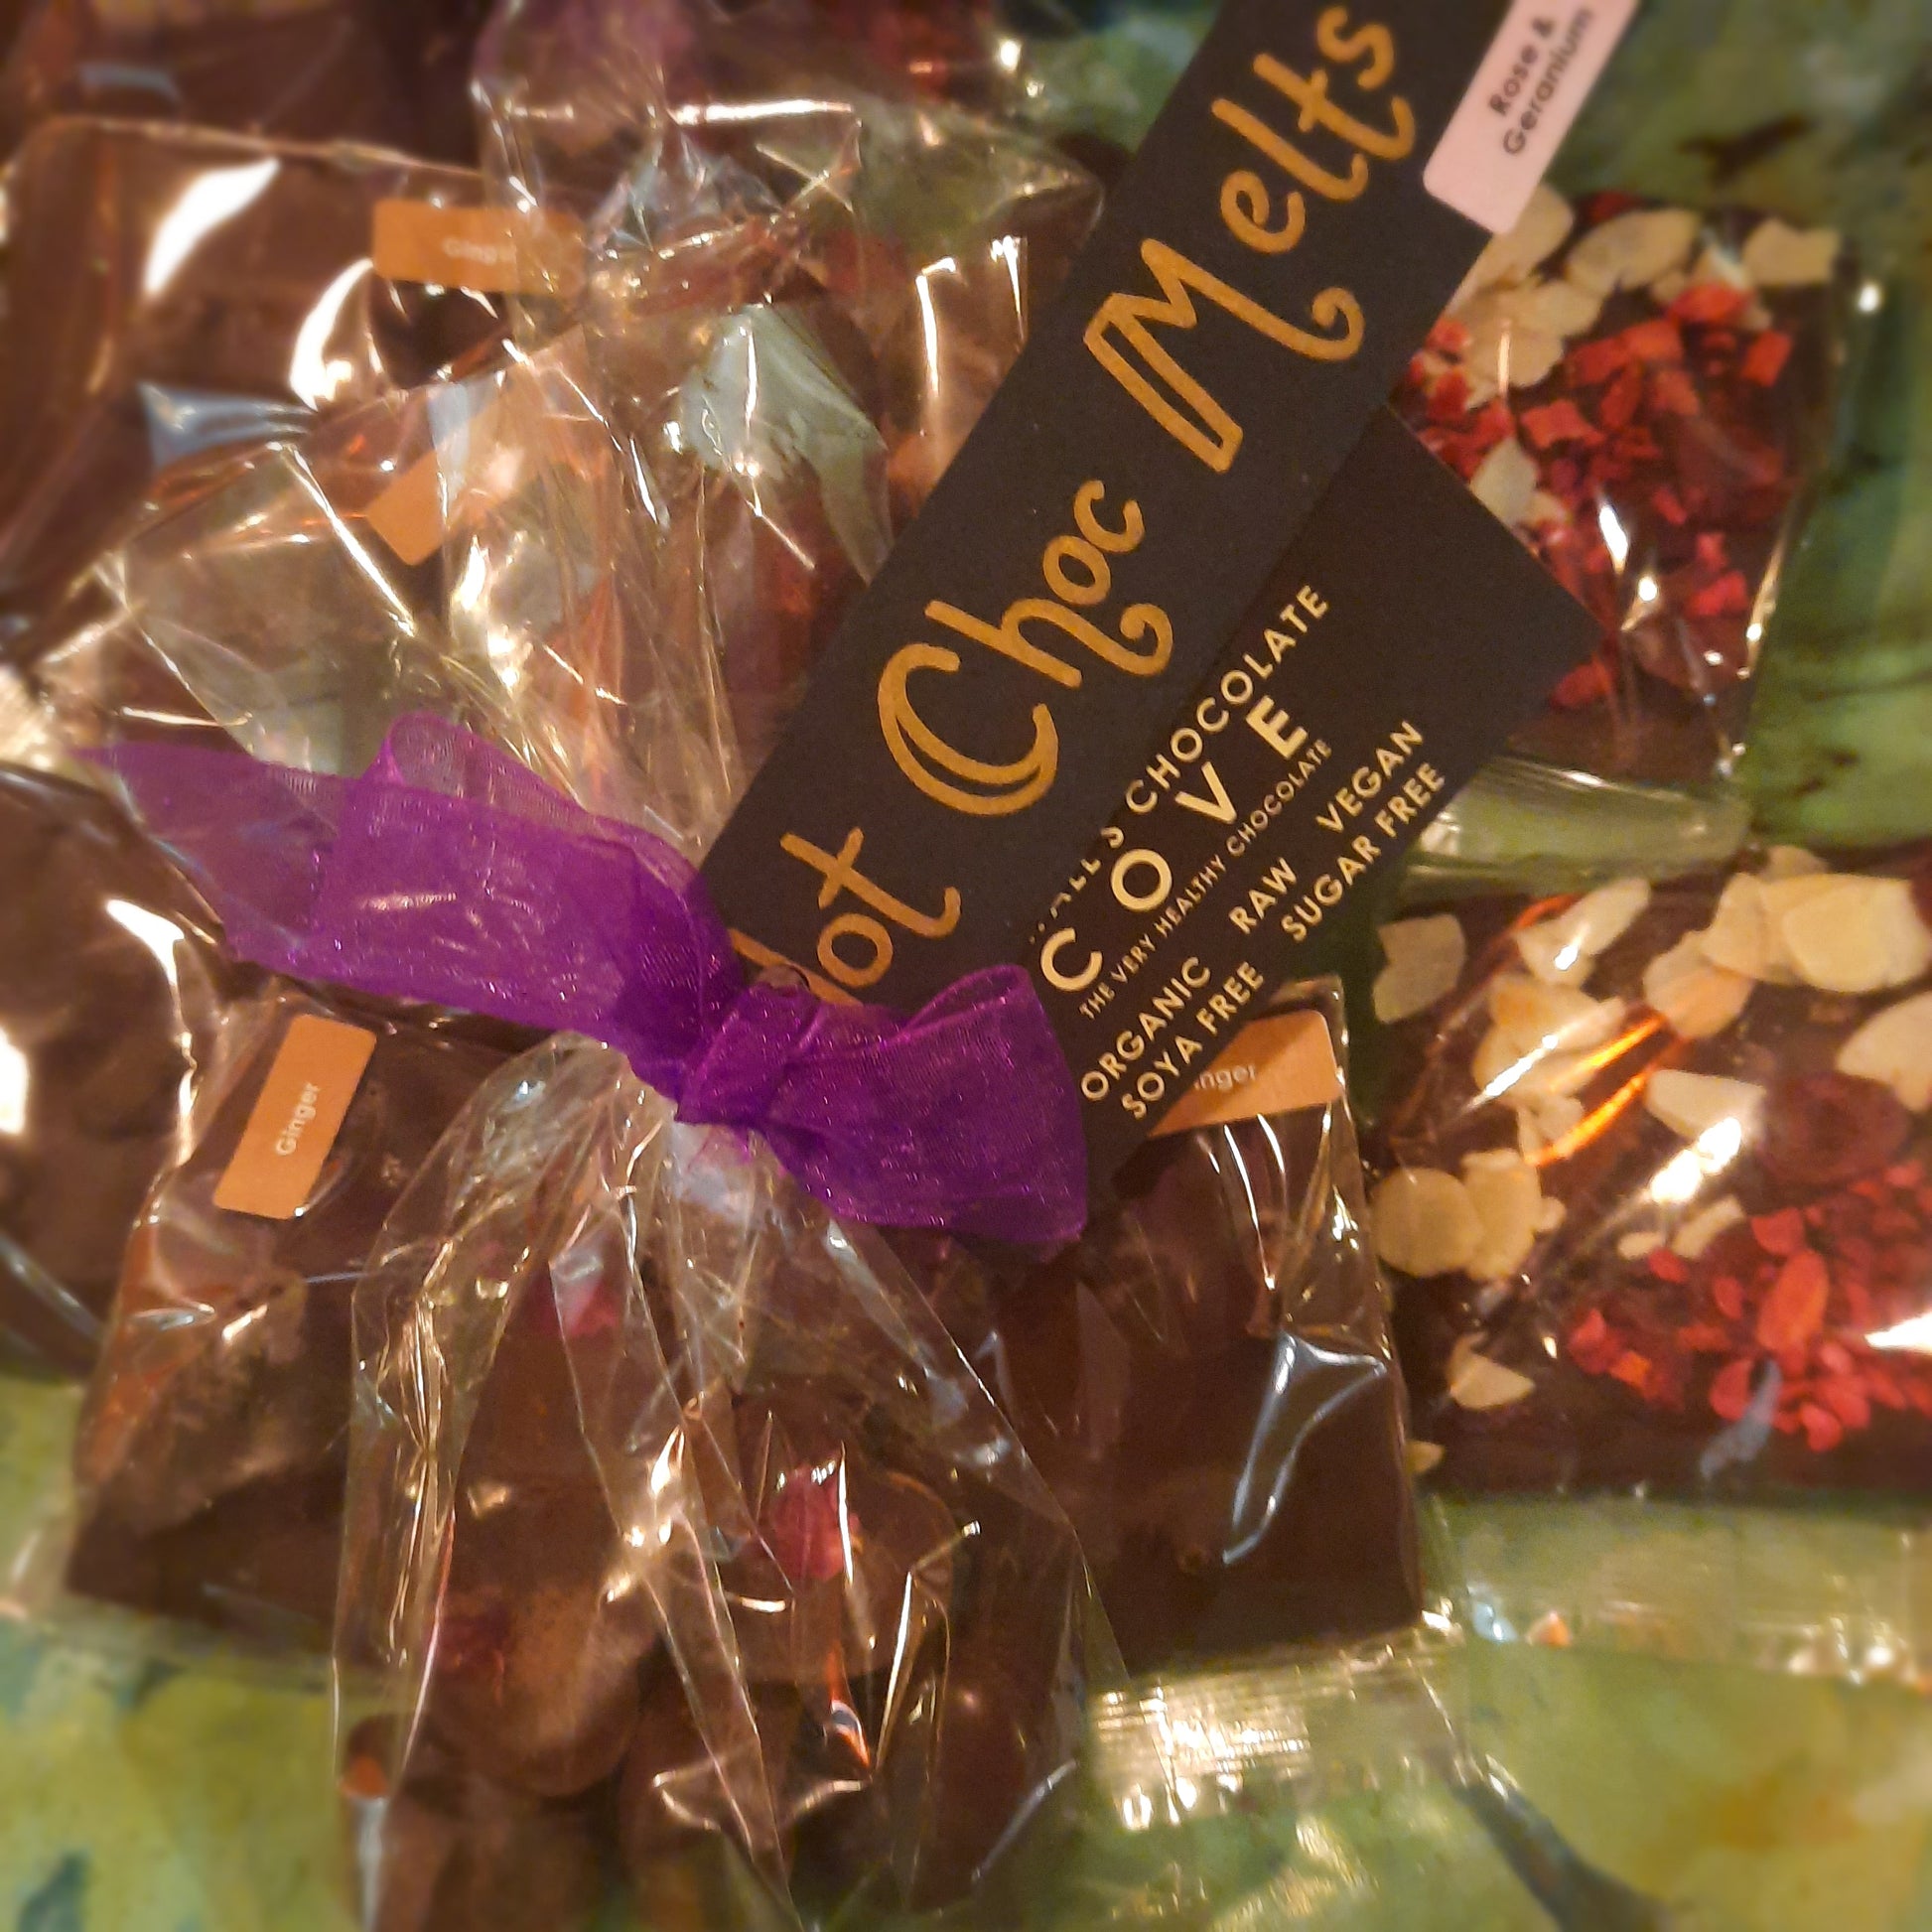 Cornwall's Chocolate Cove plant based, soya, palm oil, cane sugar and gluten free, organic raw chocolate. A selection of chocolatey treats from the shop.